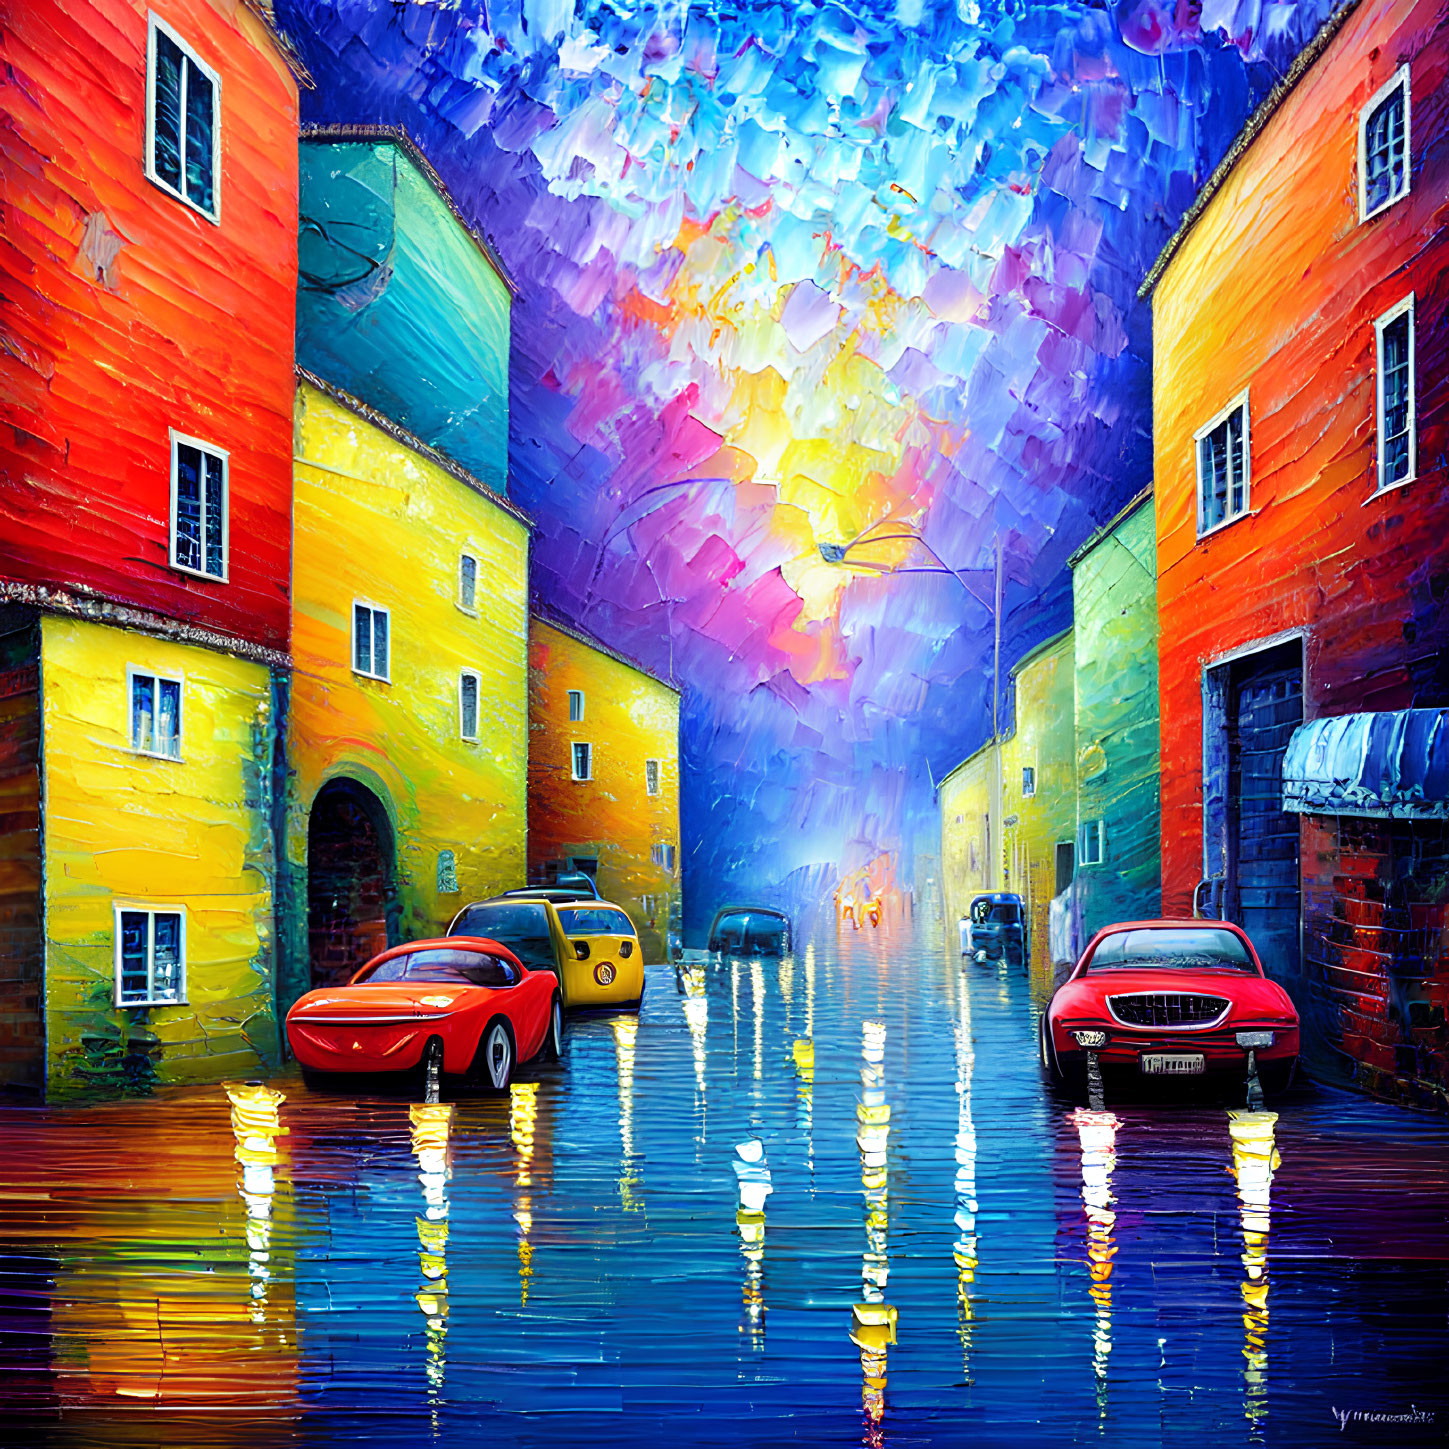 Colorful Buildings Reflecting on Wet Pavement in Vibrant Street Scene